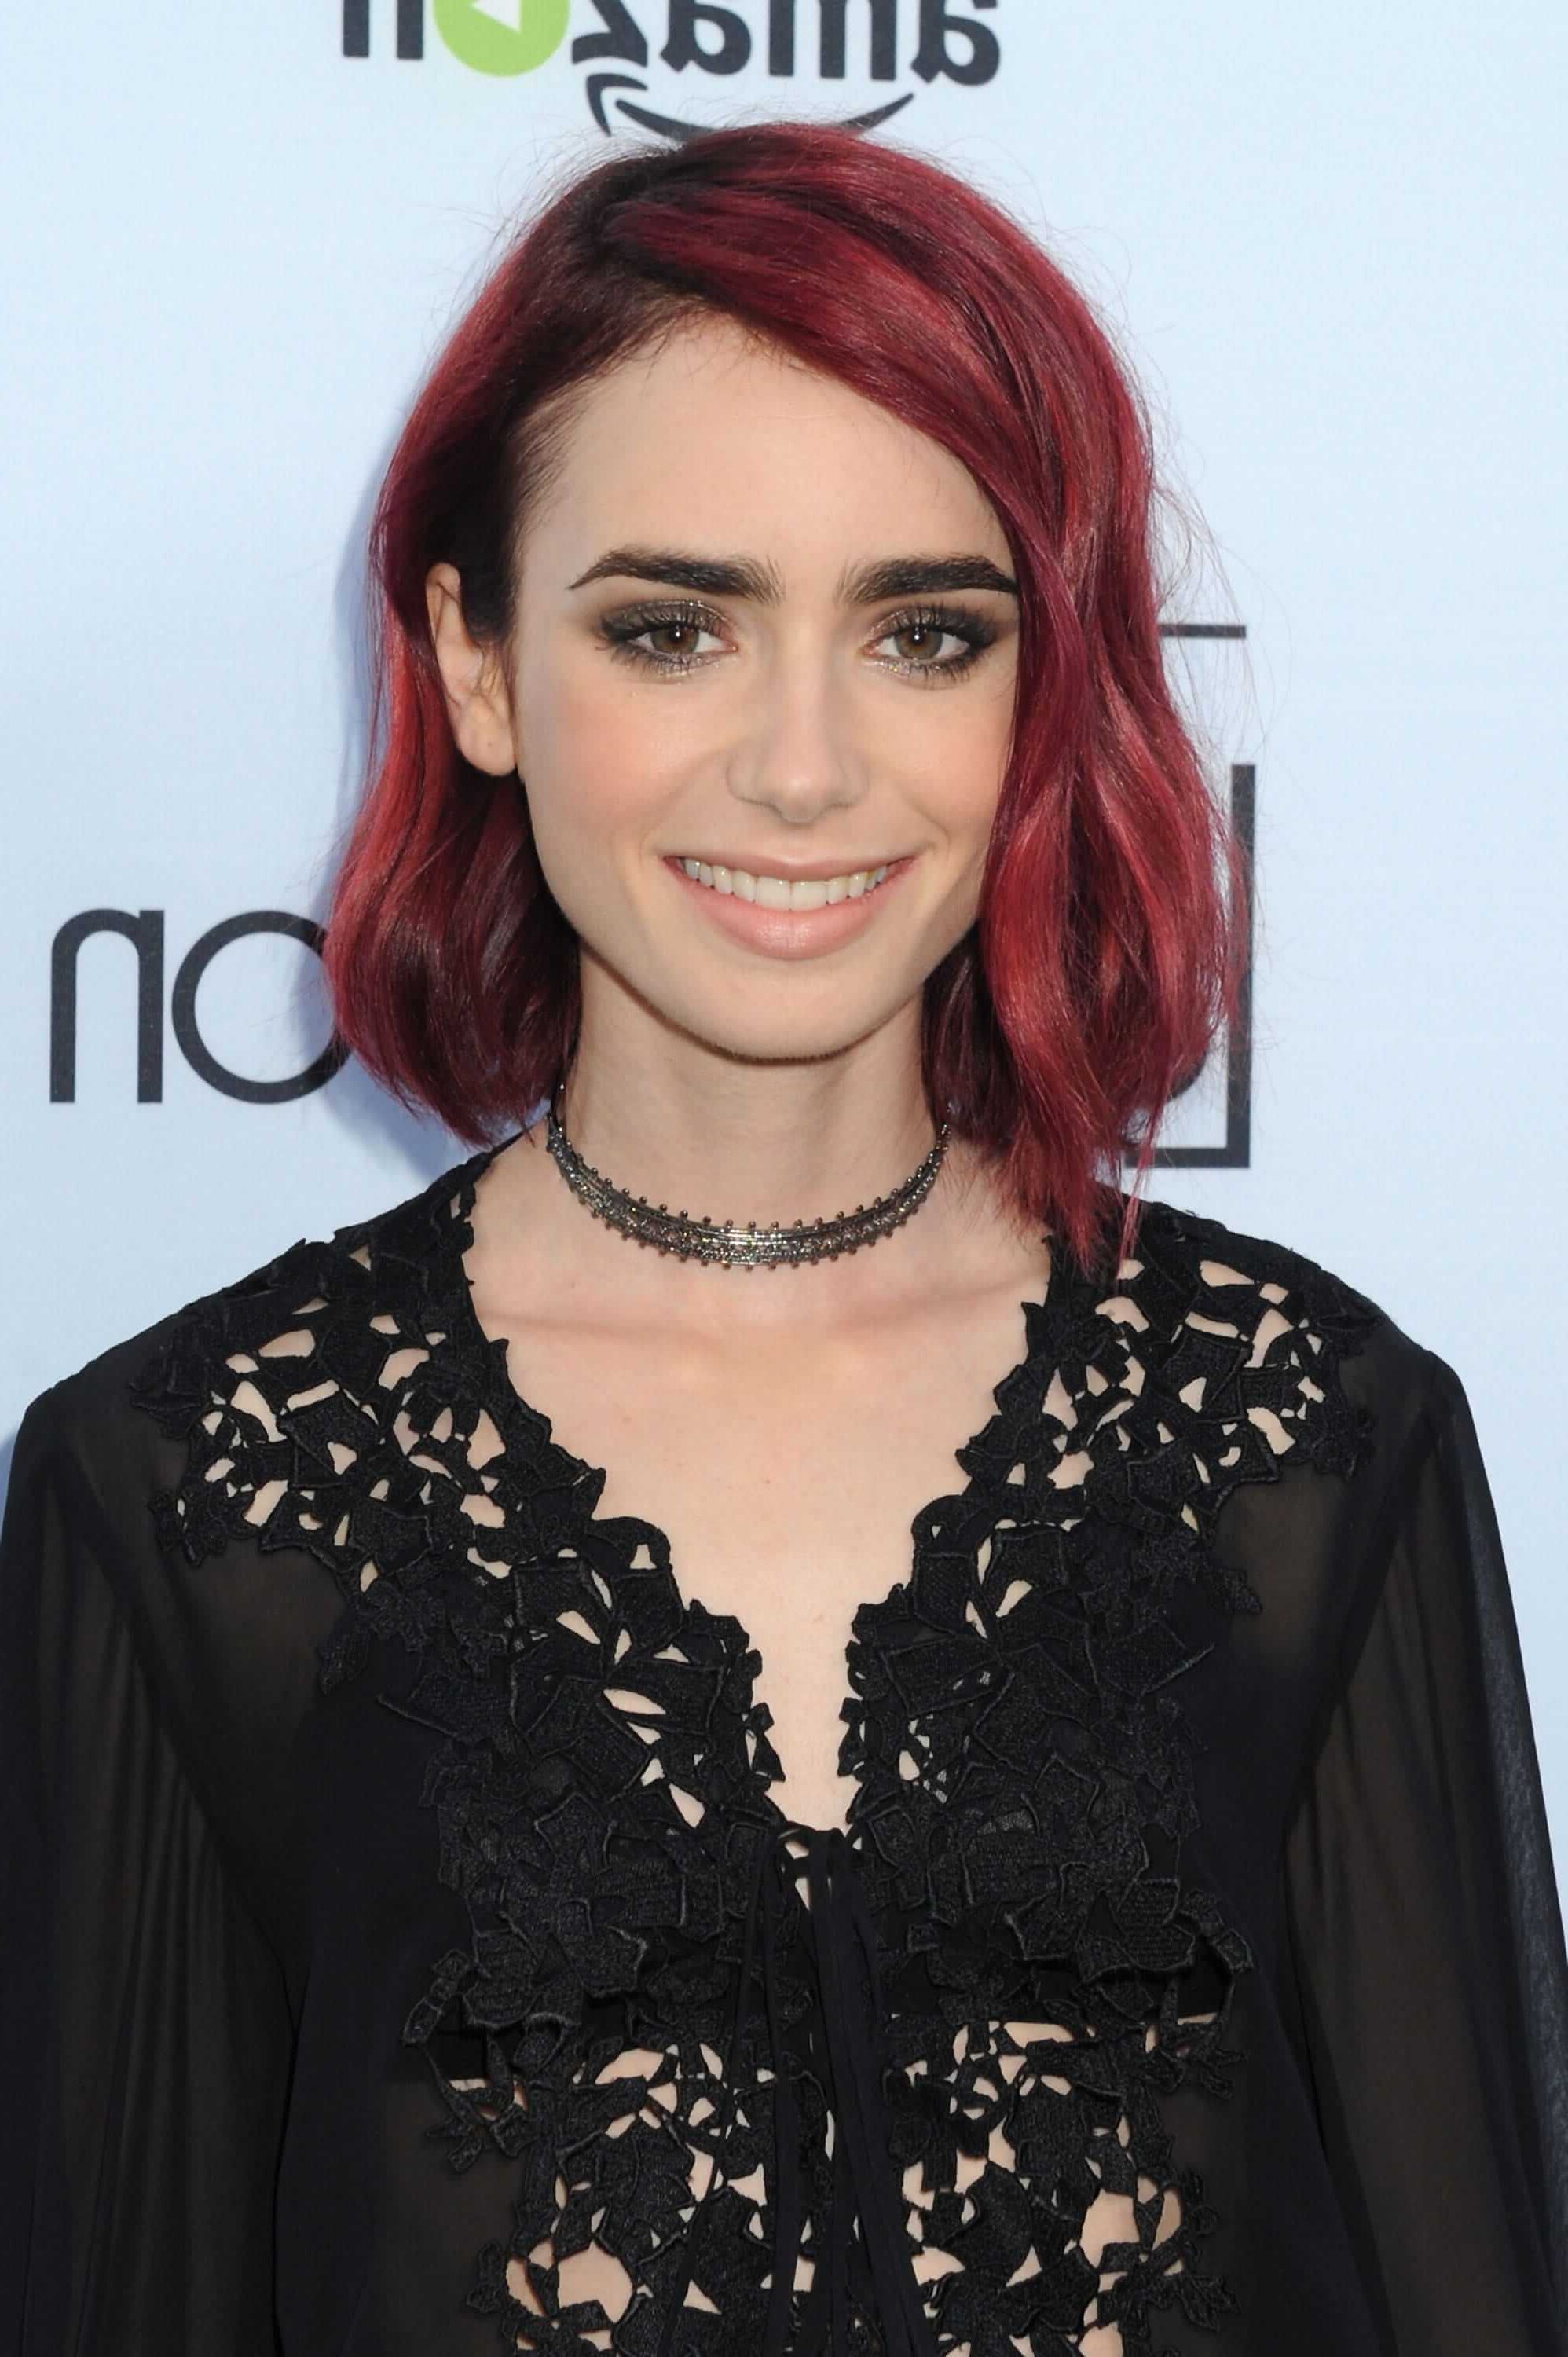 Lily Collins Wows On The Red Carpet With Bright Red Hair | All Pertaining To Bright Red Short Hairstyles (View 24 of 25)